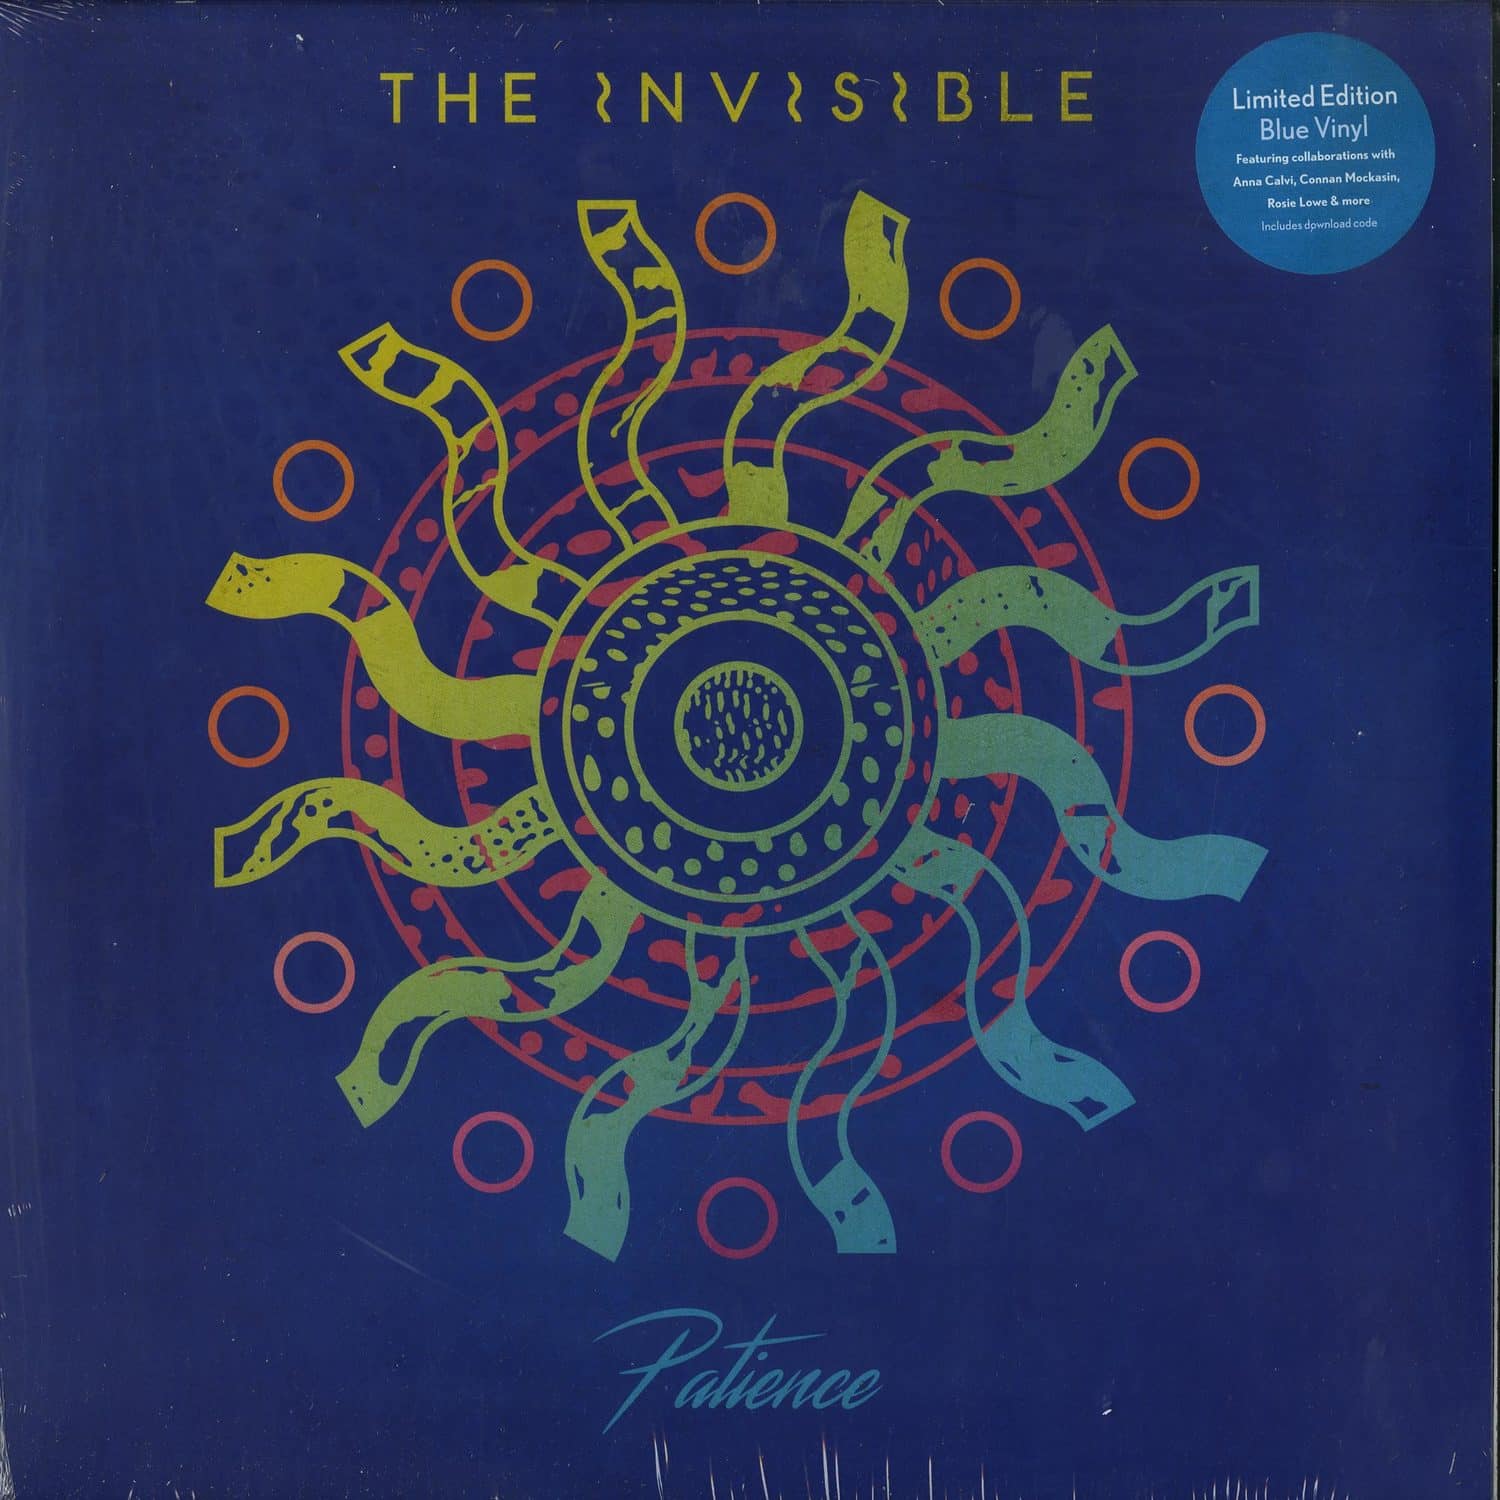 The Invisible - PATIENCE 